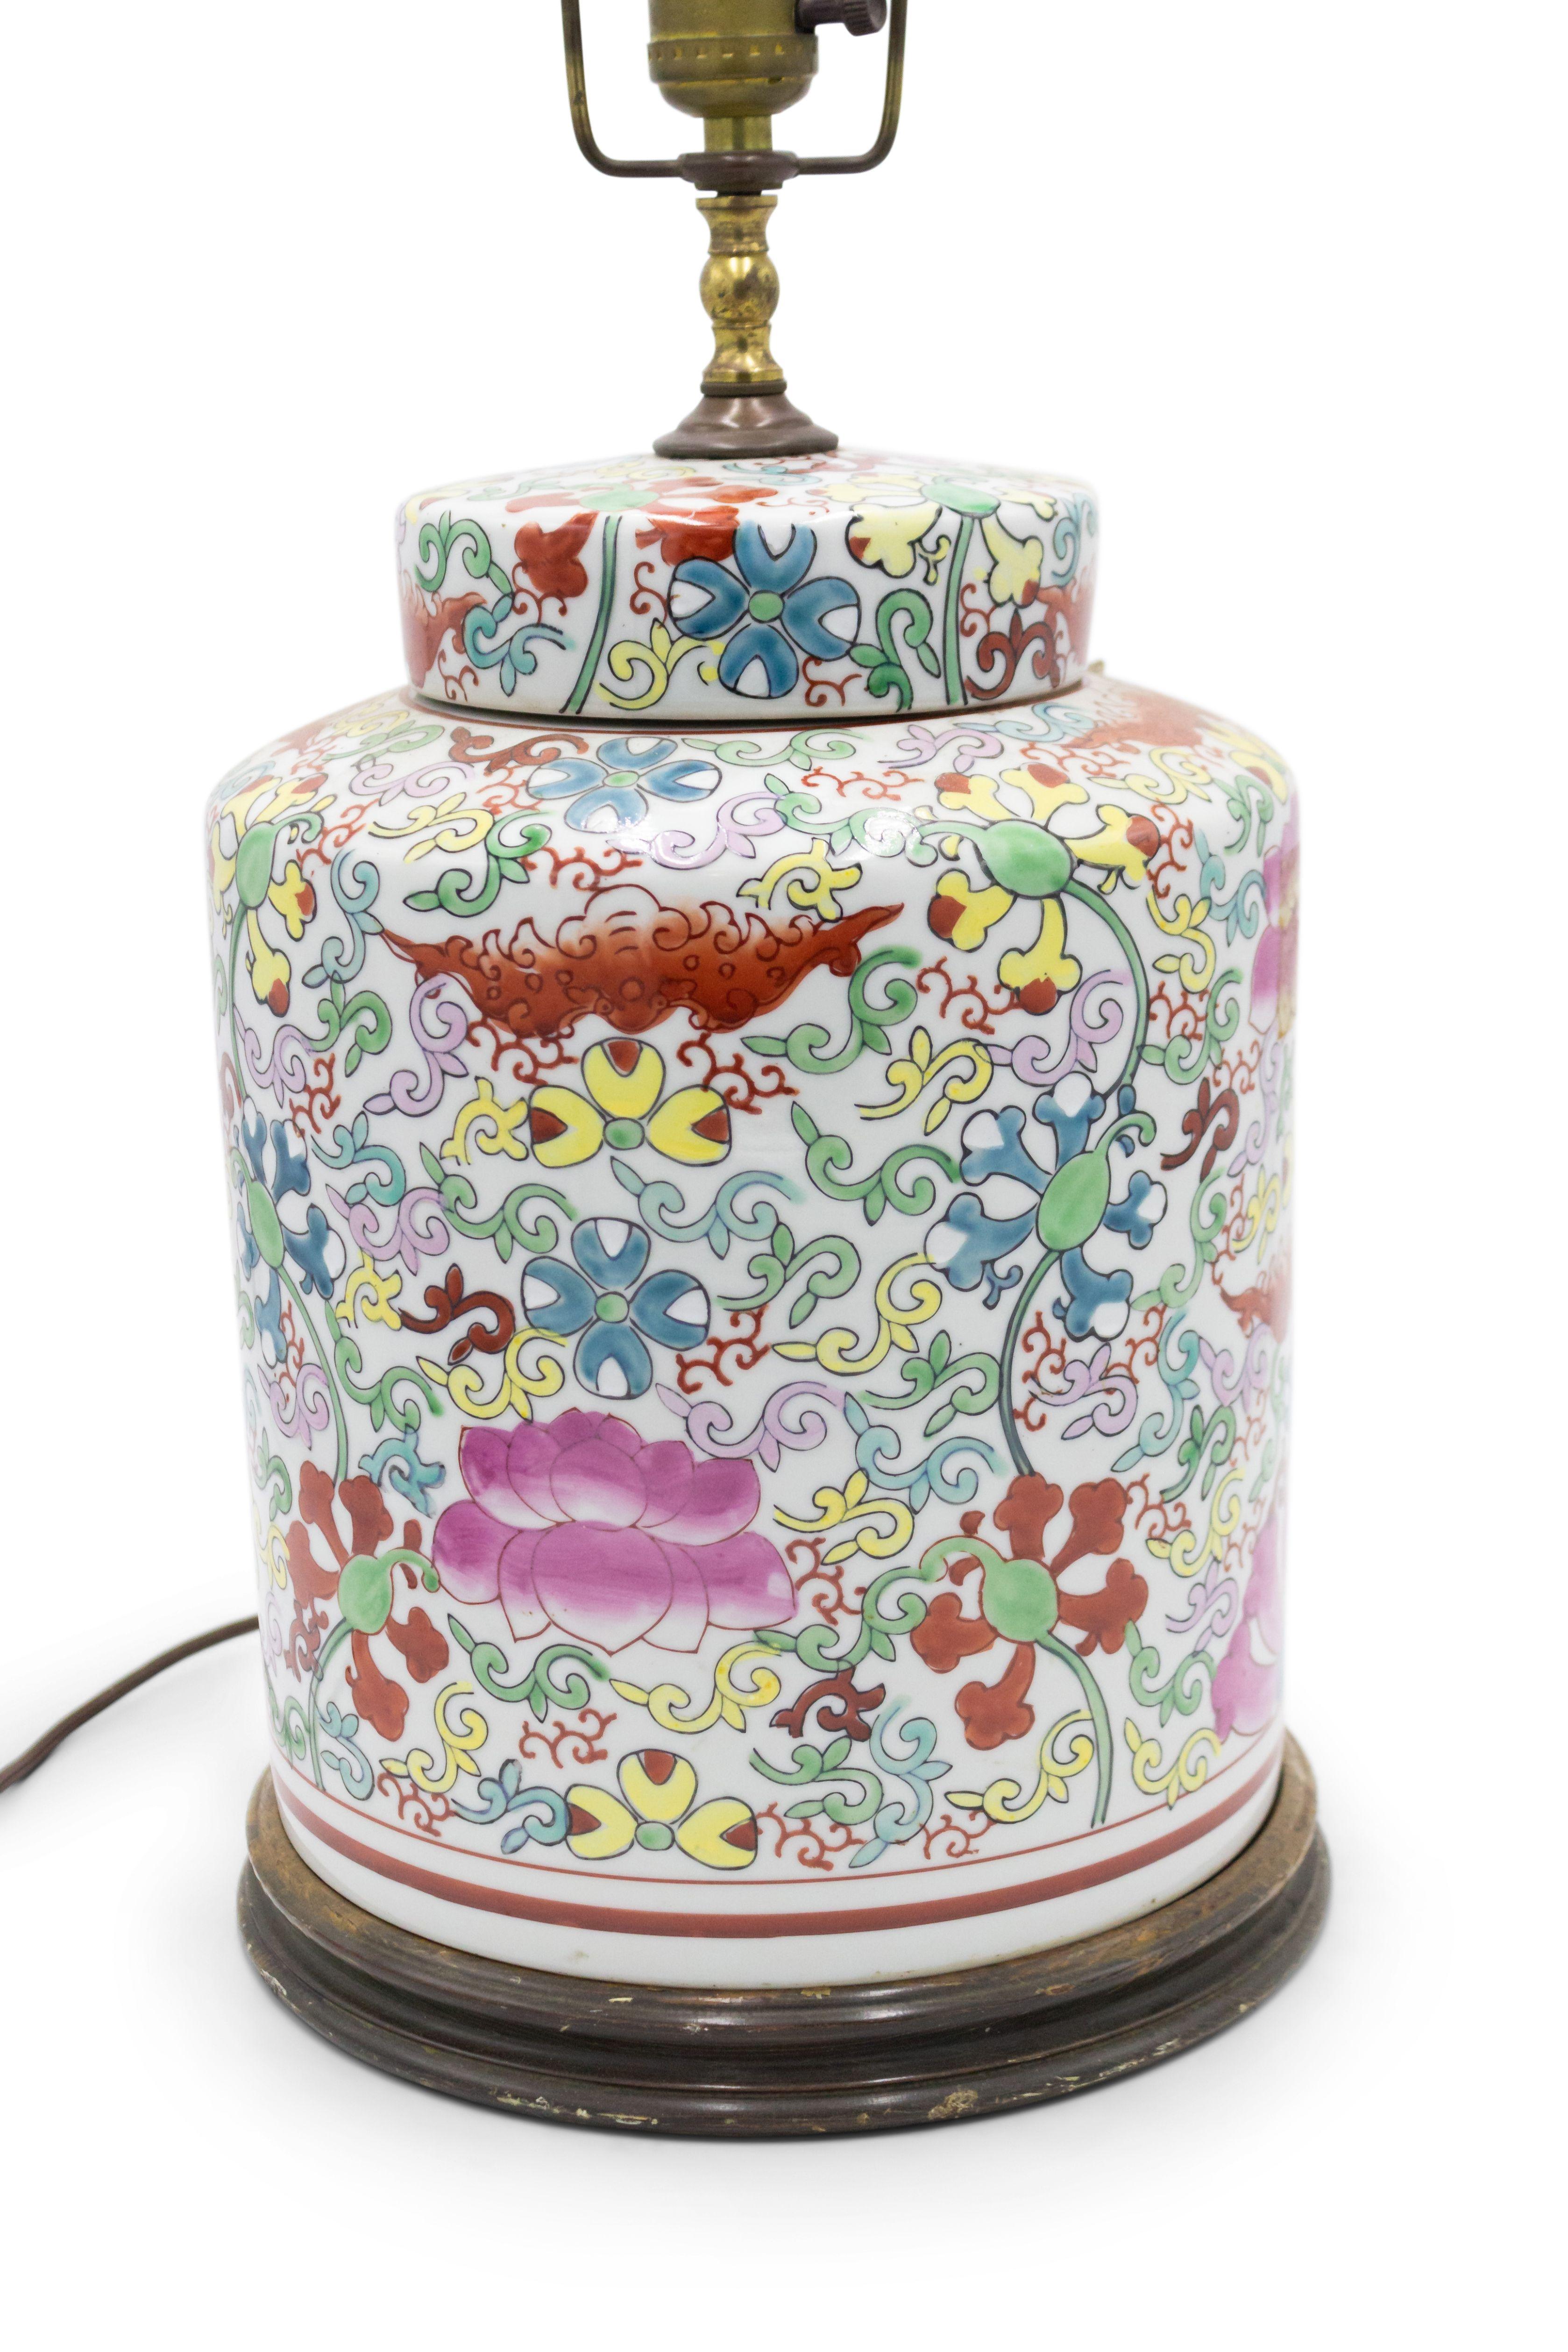 Asian Chinese style (20th Century) porcelain ginger jar cylindrical form lamp in red, green & yellow on a white field.